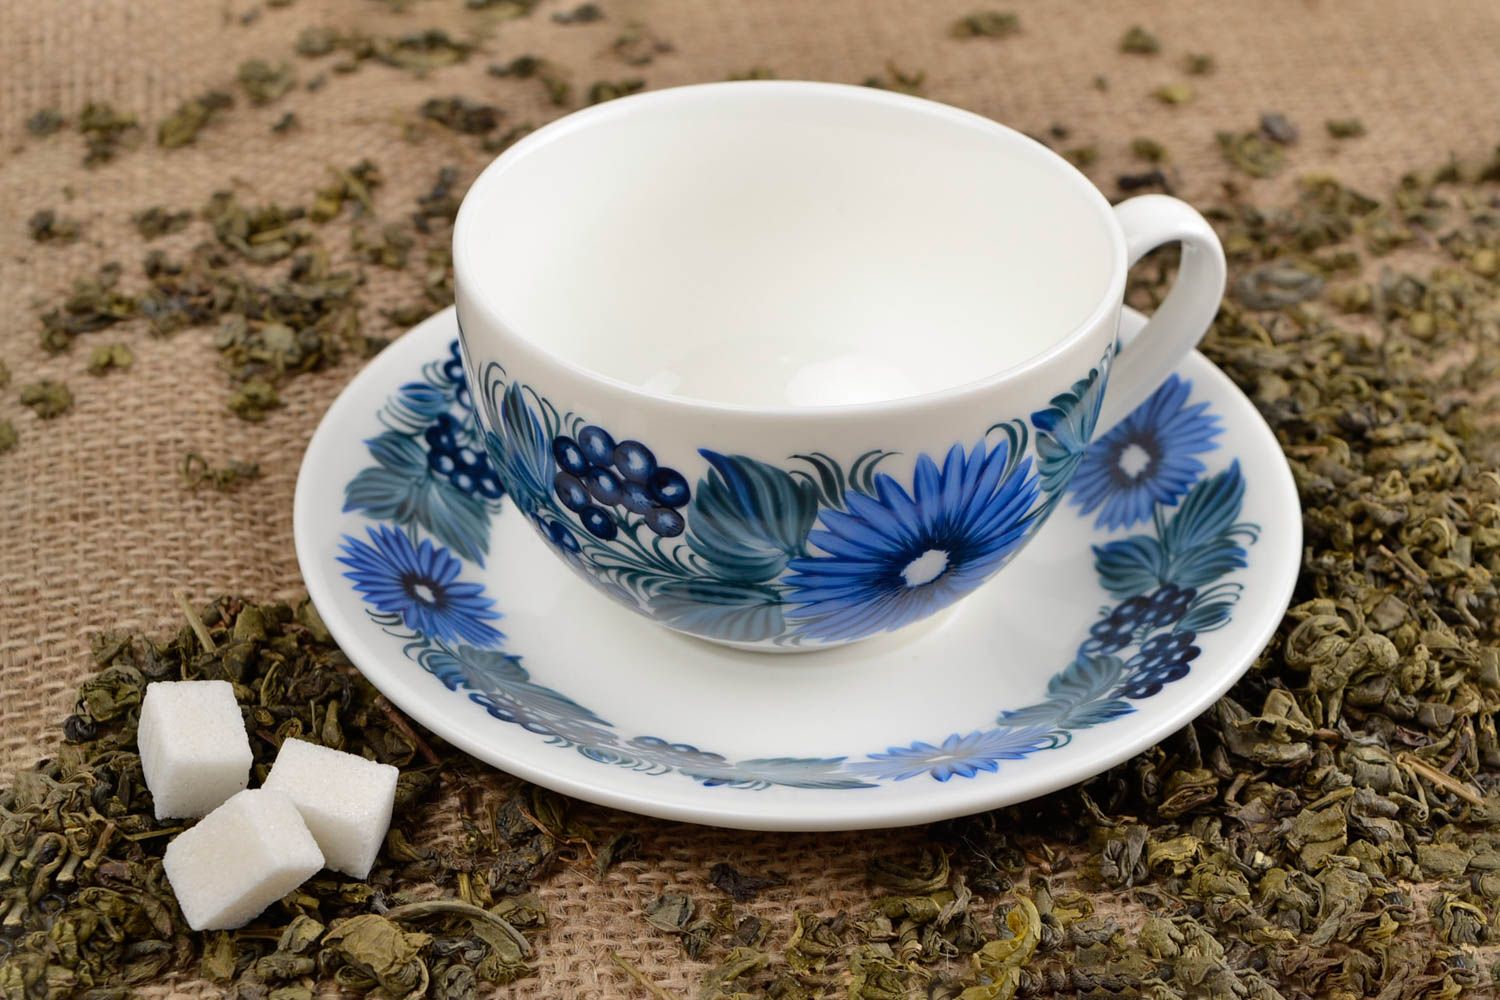 8 oz white and blue teacup in classic shape with handle and saucer photo 1